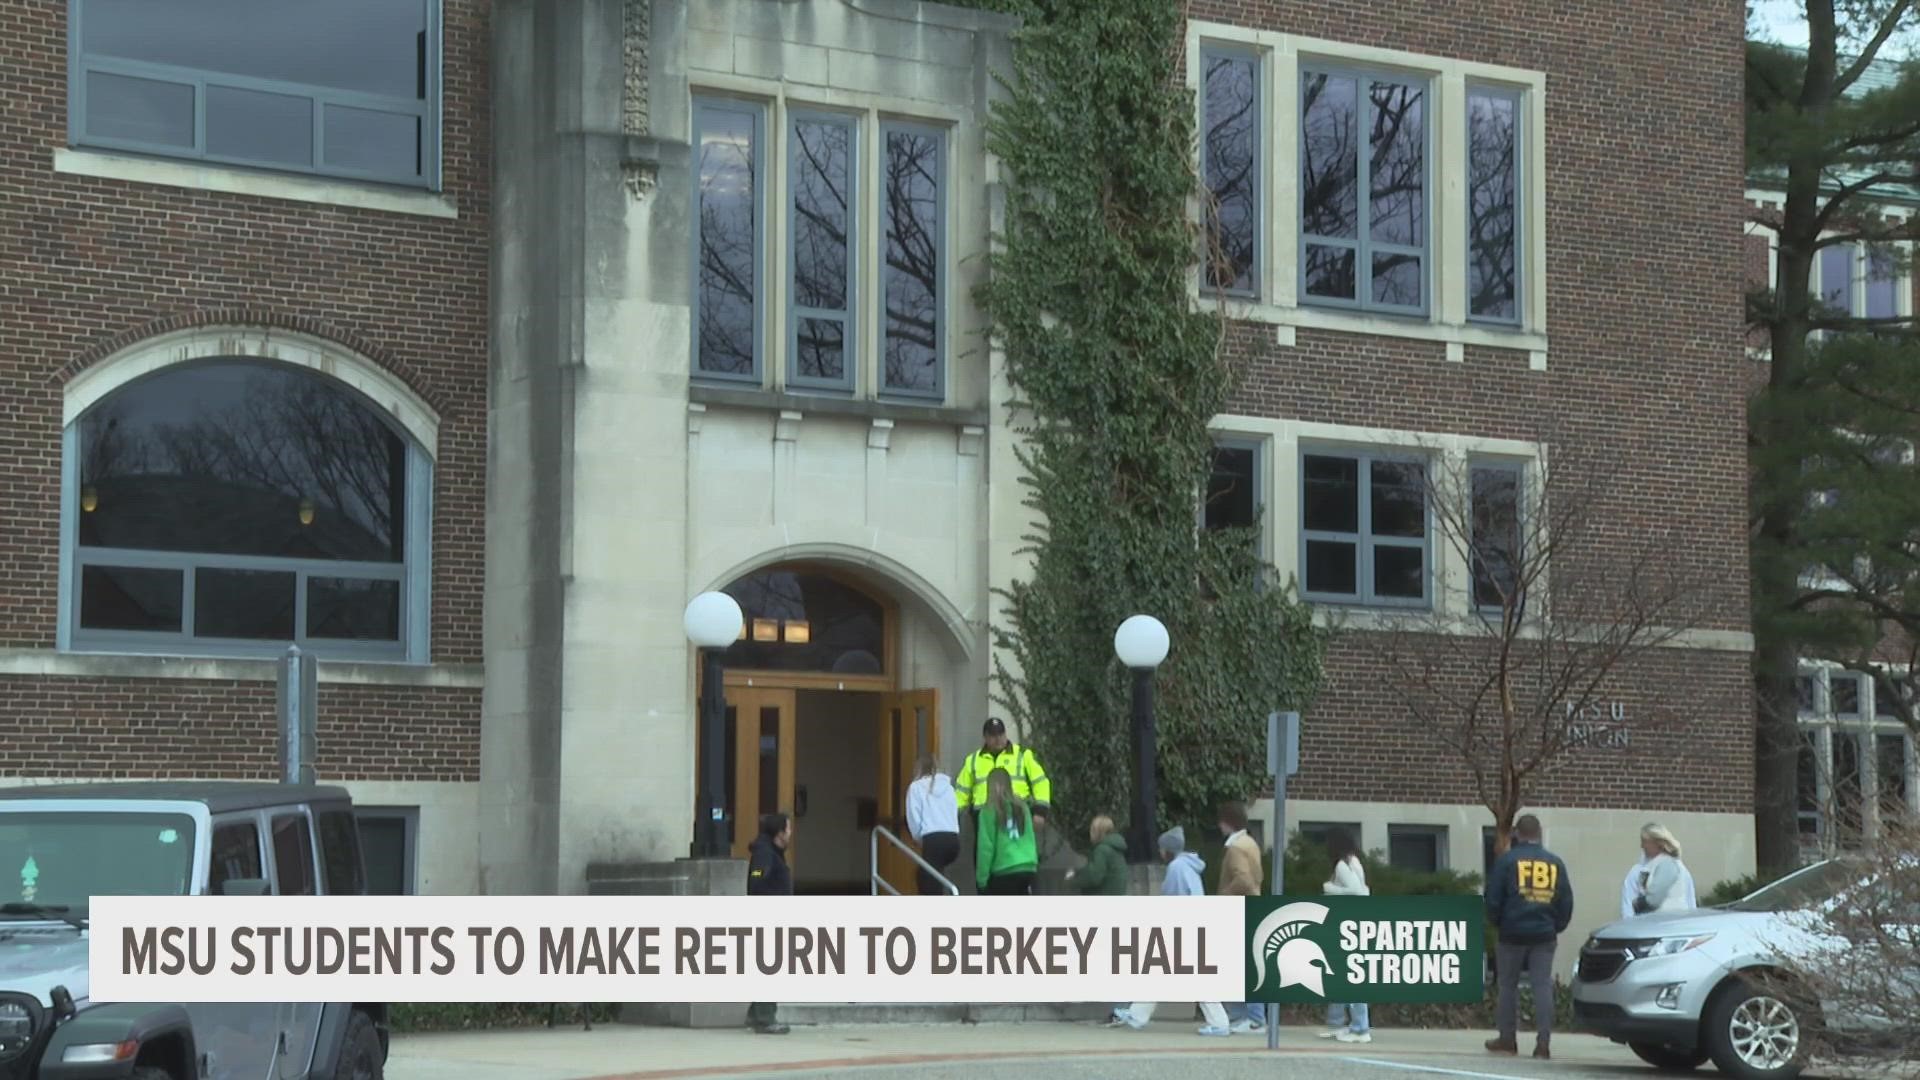 On Wednesday, students returned to the MSU Union building to retrieve belongings left during Monday's shooting. On Thursday, students will do the same at Berkey.